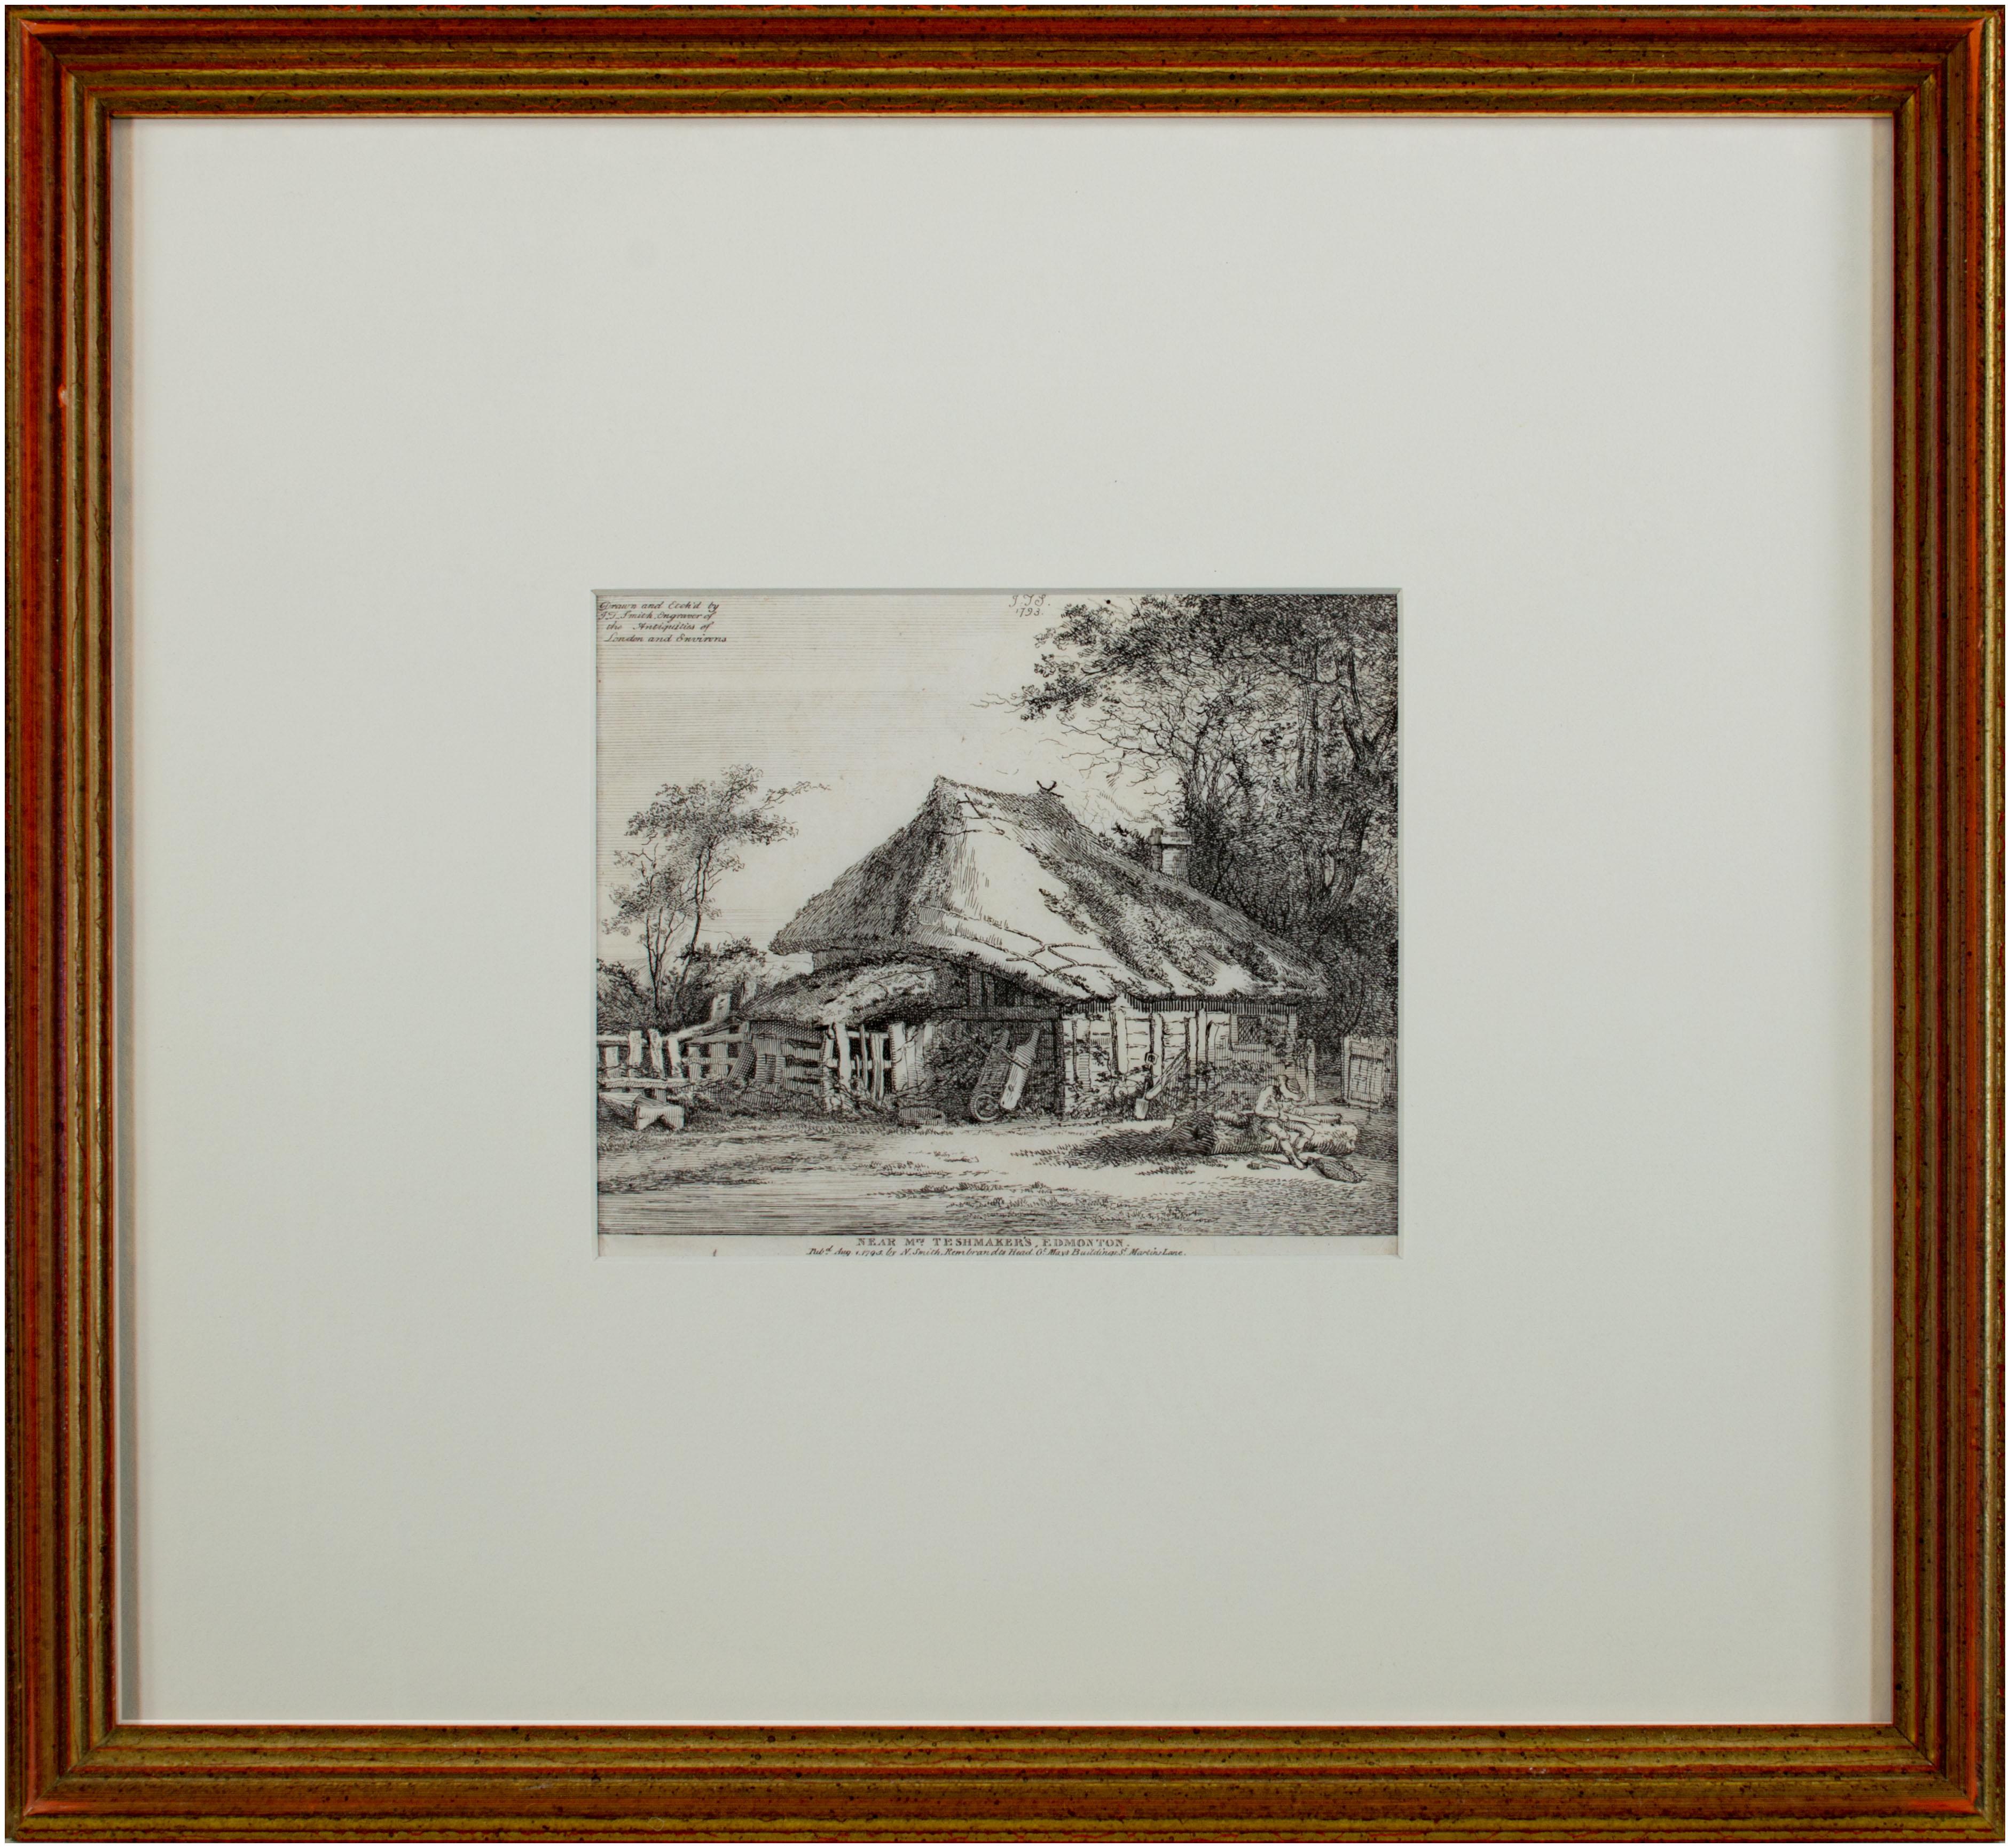 The present is one of the many prints John Thomas Smith produced of English cottages and vernacular architecture. This example, a view of a cottage in Edmonton, is closely related to a series of 20 etchings that Smith would publish in 1797 under the